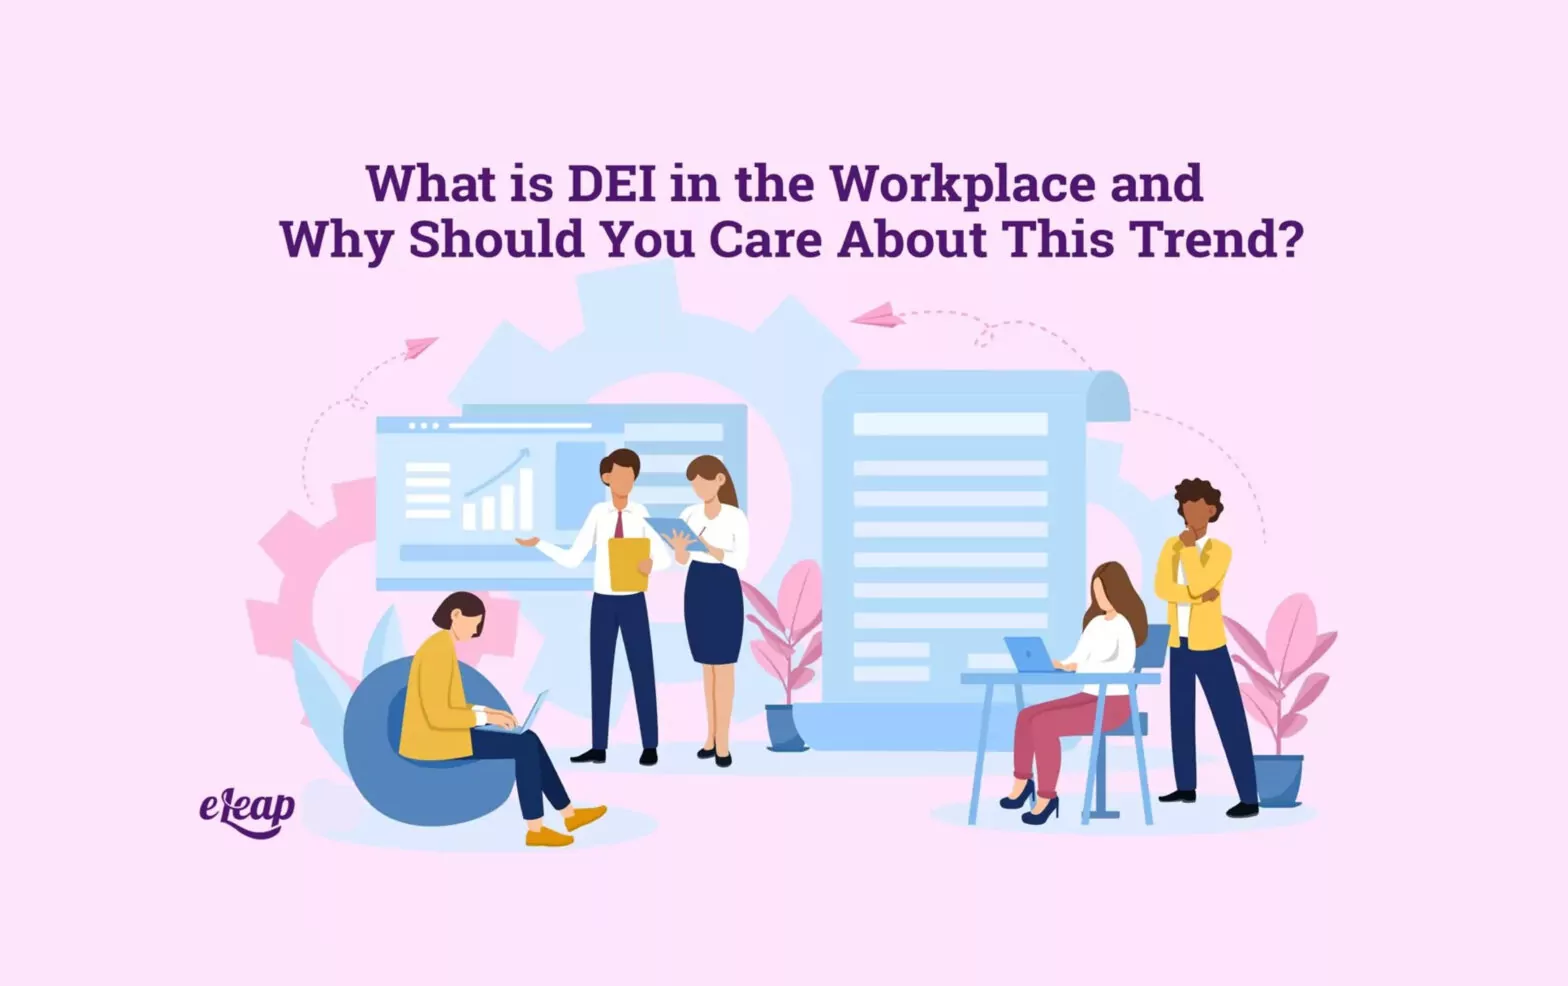 What is DEI in the Workplace and Why Should You Care About This Trend?